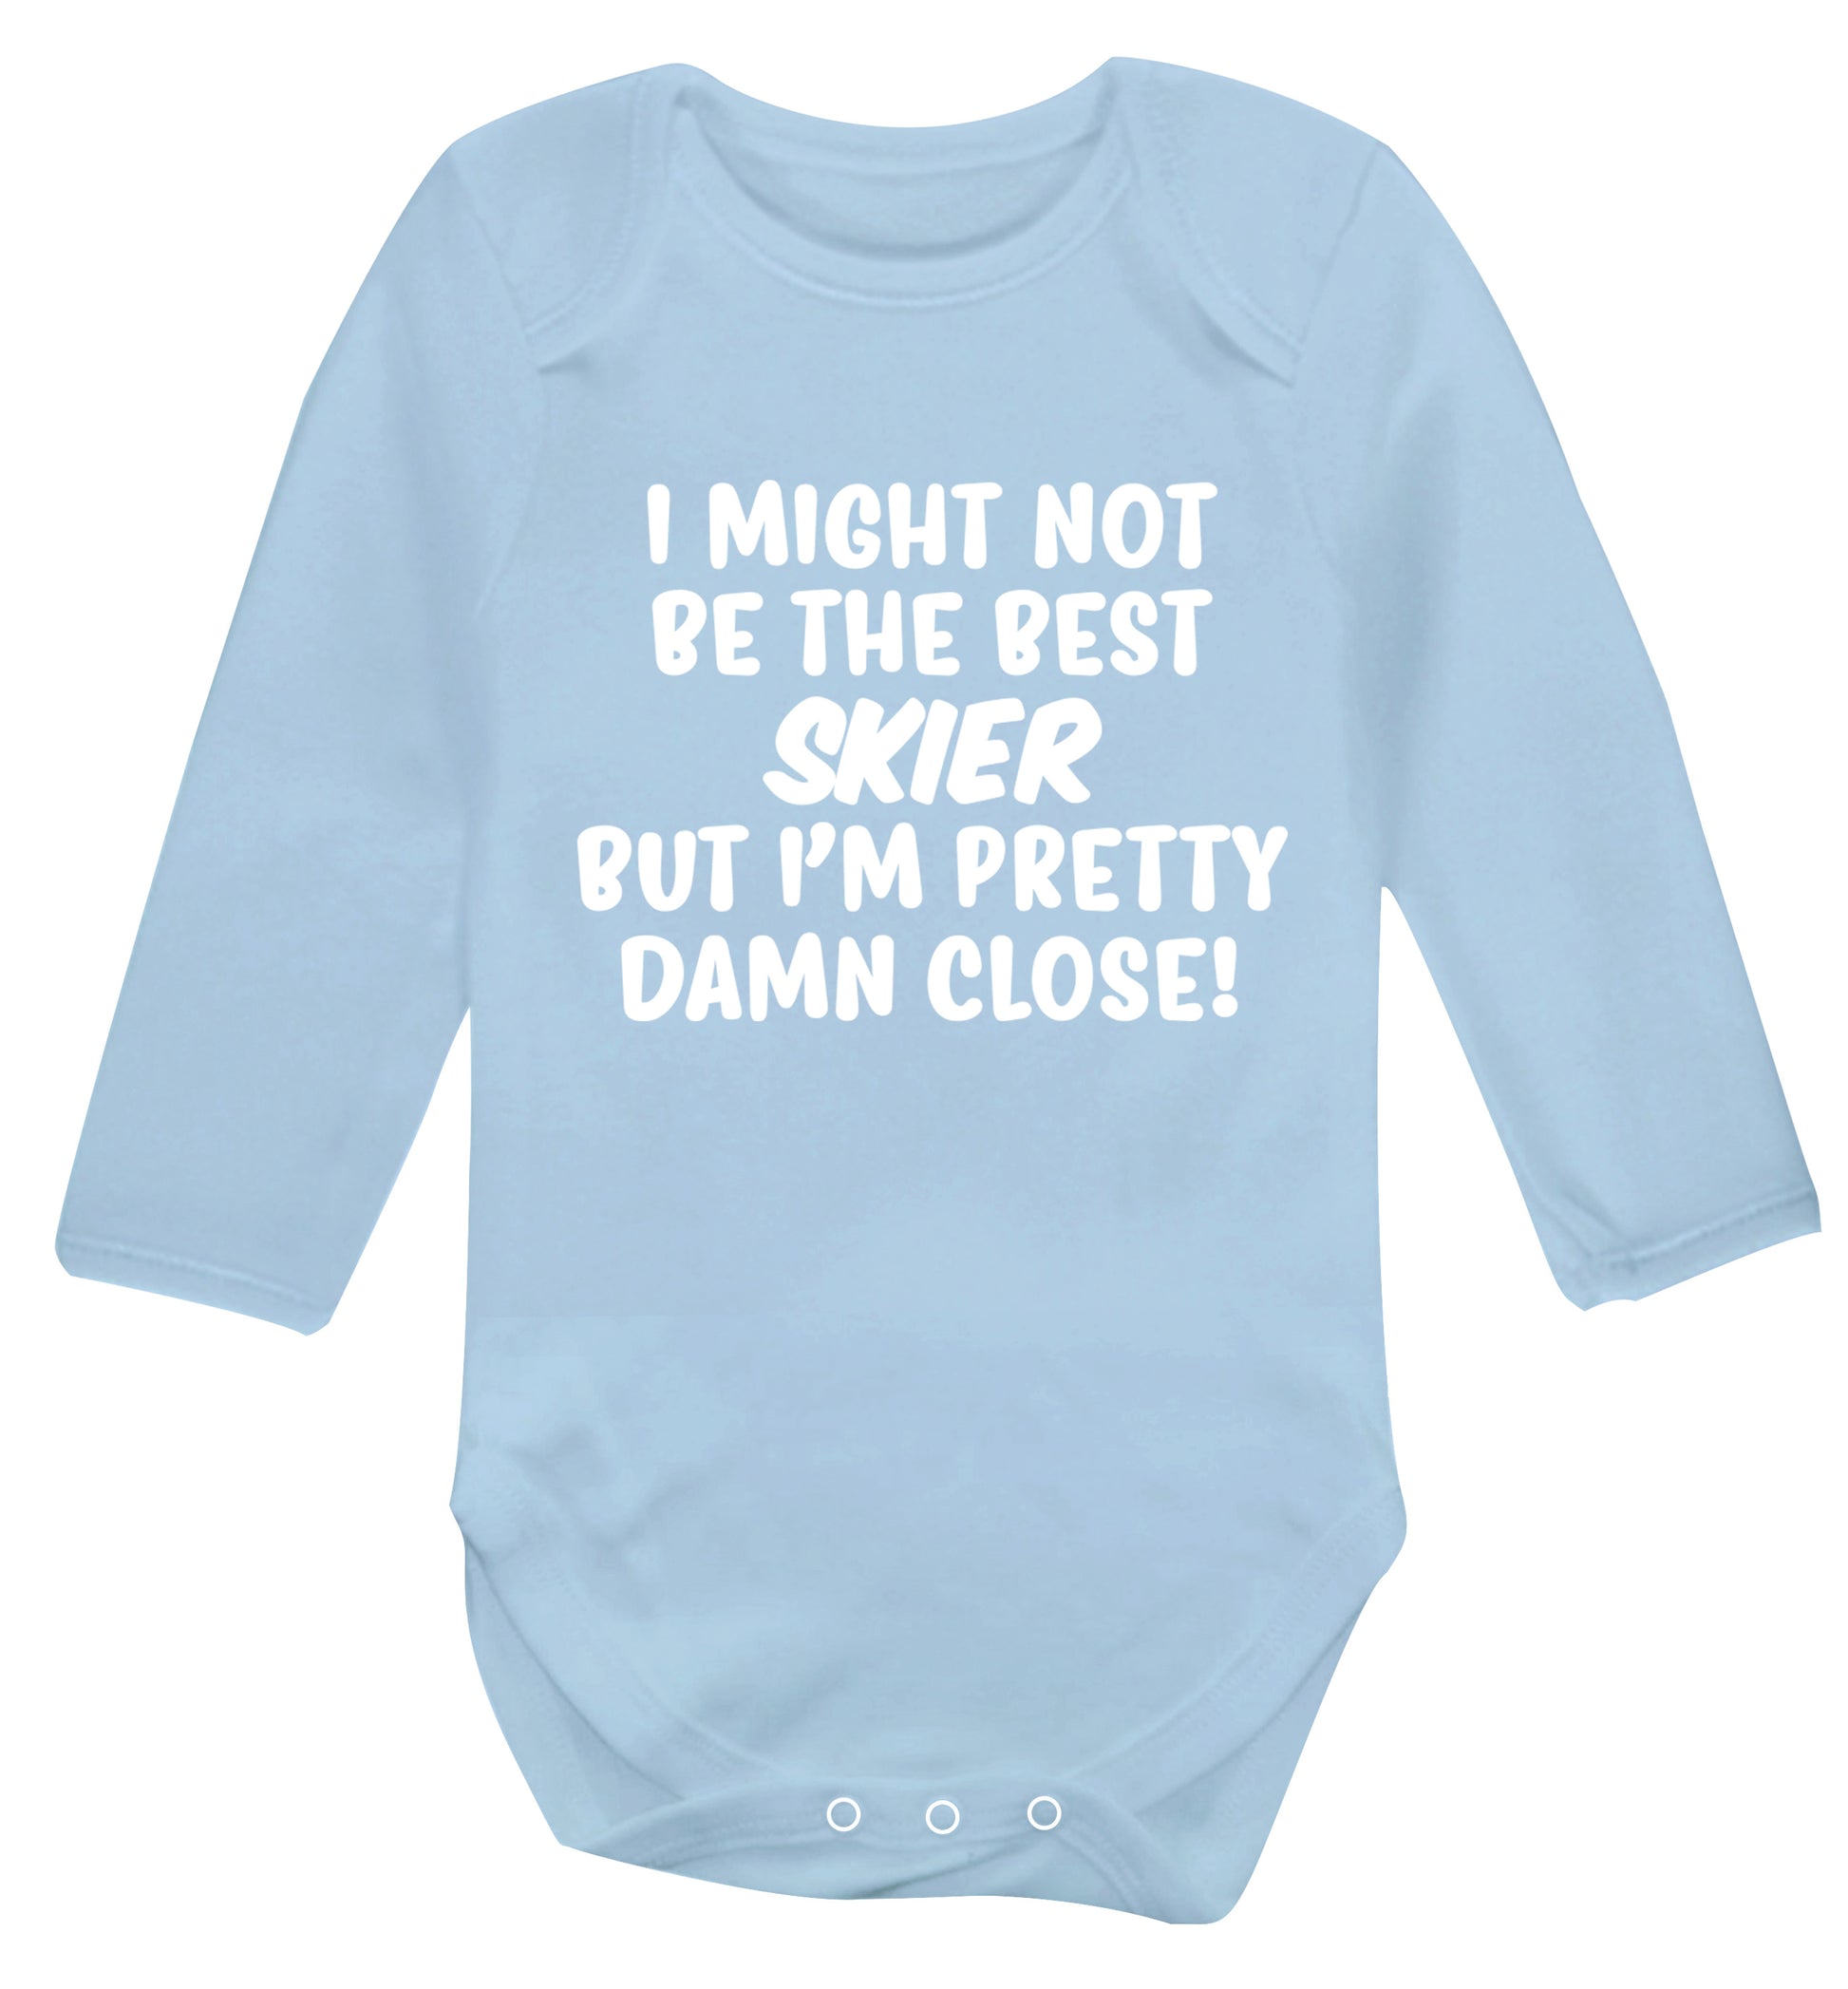 I might not be the best skier but I'm pretty damn close! Baby Vest long sleeved pale blue 6-12 months